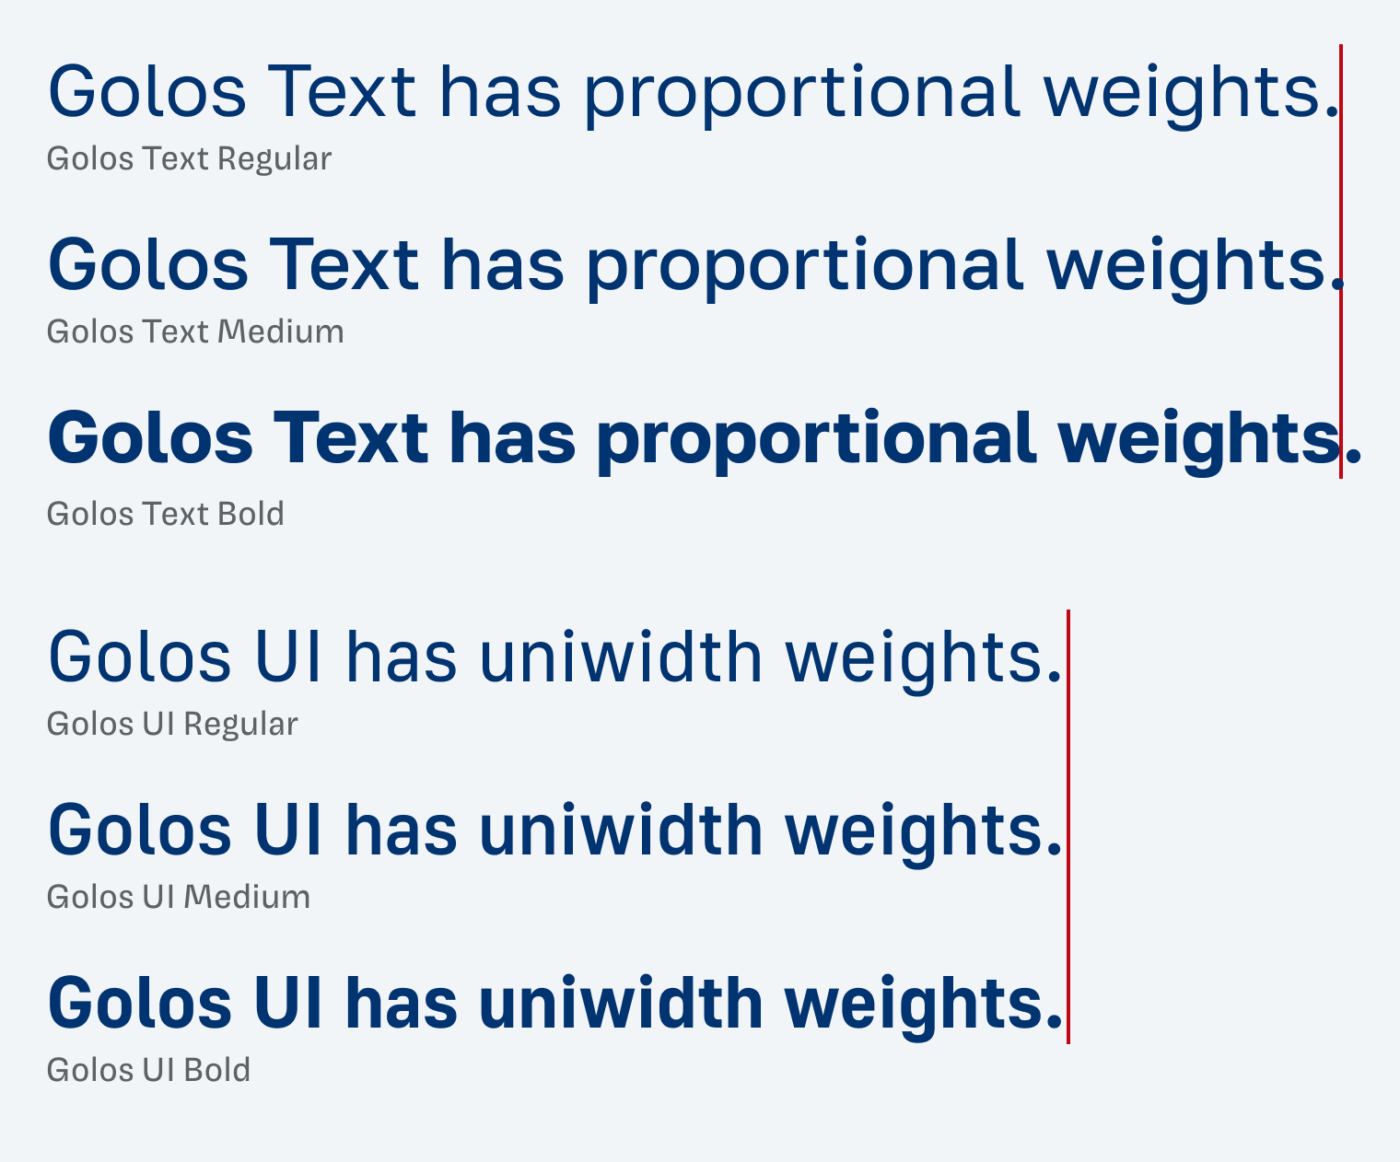 Golos Text has proportional weights. Golos UI has uniwidth weights.